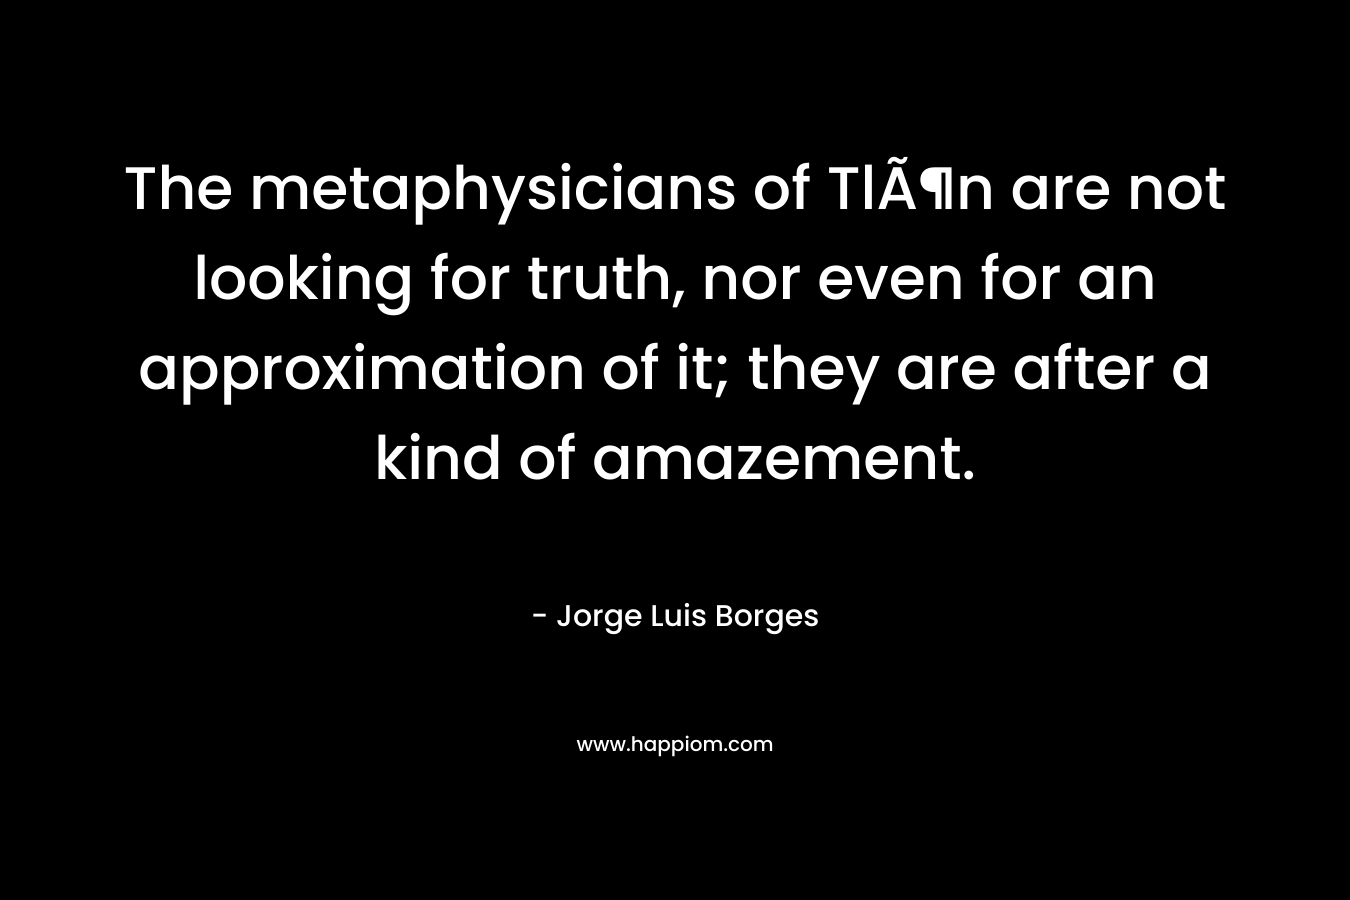 The metaphysicians of TlÃ¶n are not looking for truth, nor even for an approximation of it; they are after a kind of amazement.